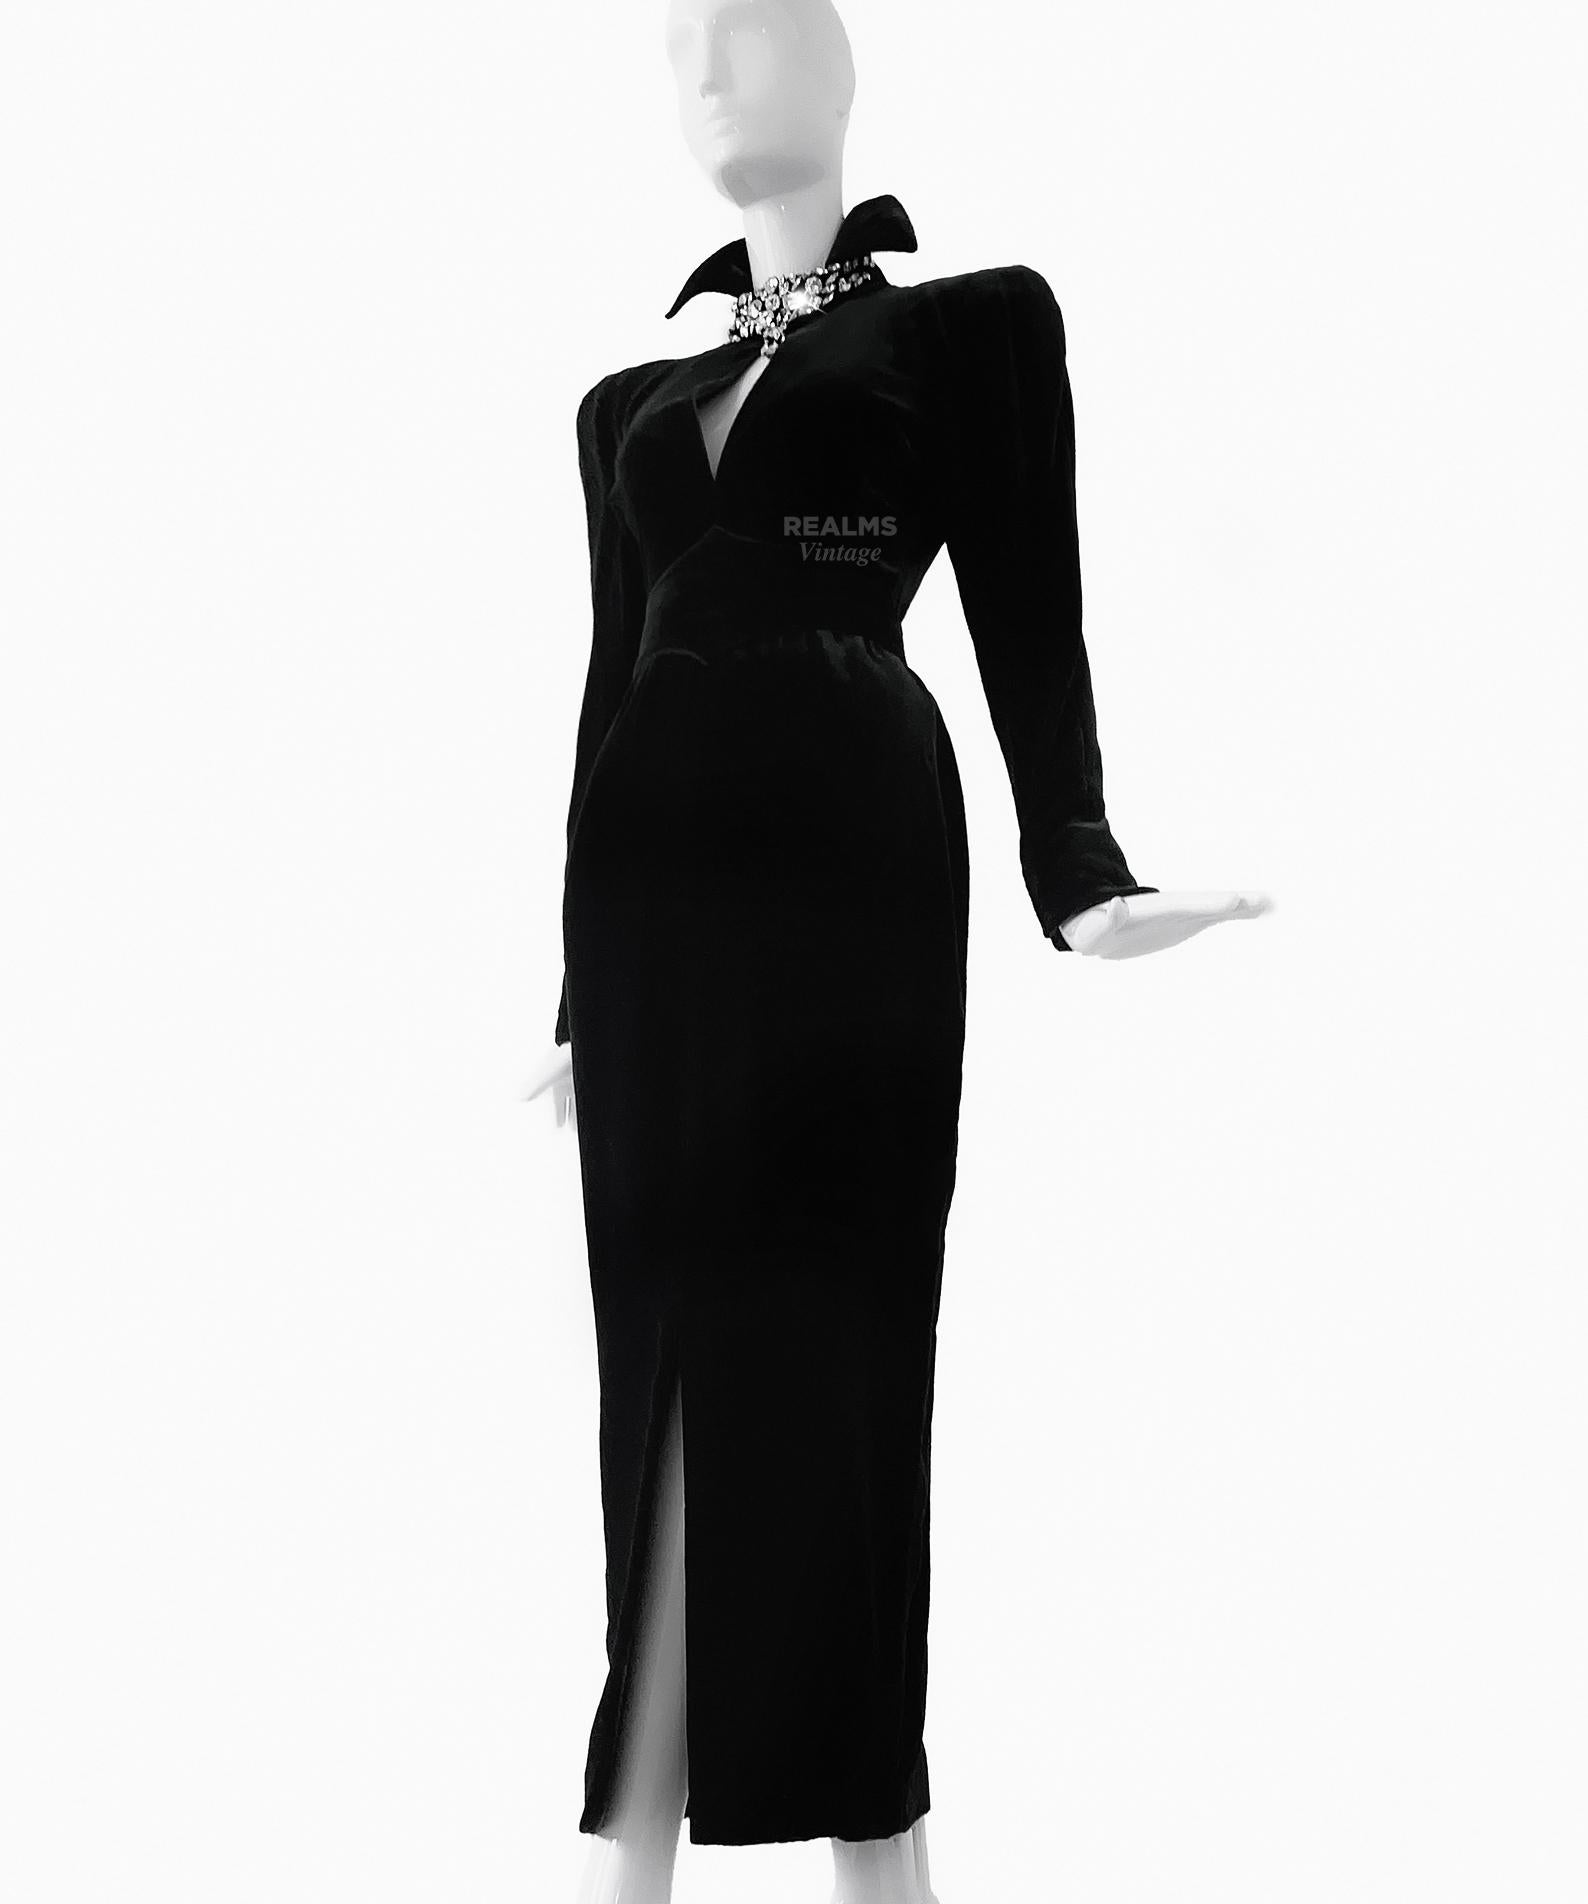 Stunning Thierry Mugler Archival  FW 1986 Evening Gown Crytsal Black Dress  For Sale 7